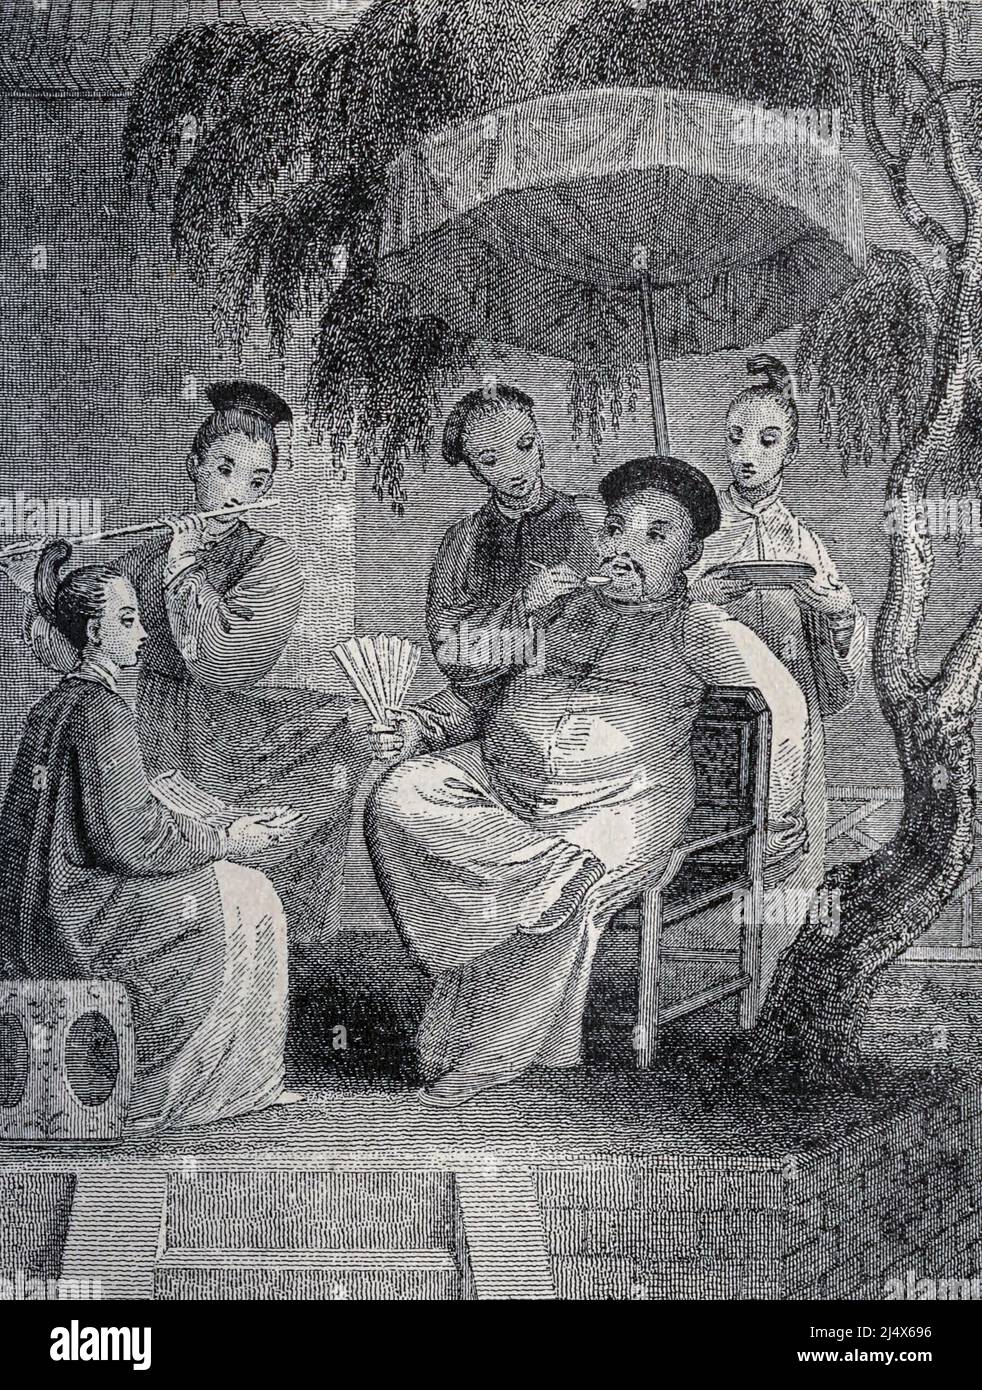 Chinese Gentleman at his Repast from the book The life and adventures of Robinson Crusoe by Daniel Defoe, Illustrated by THOMAS  STOTHARD Publisher Boston (Franklin and Hawley Streets) : D. Lothrop and Company 1884 Stock Photo